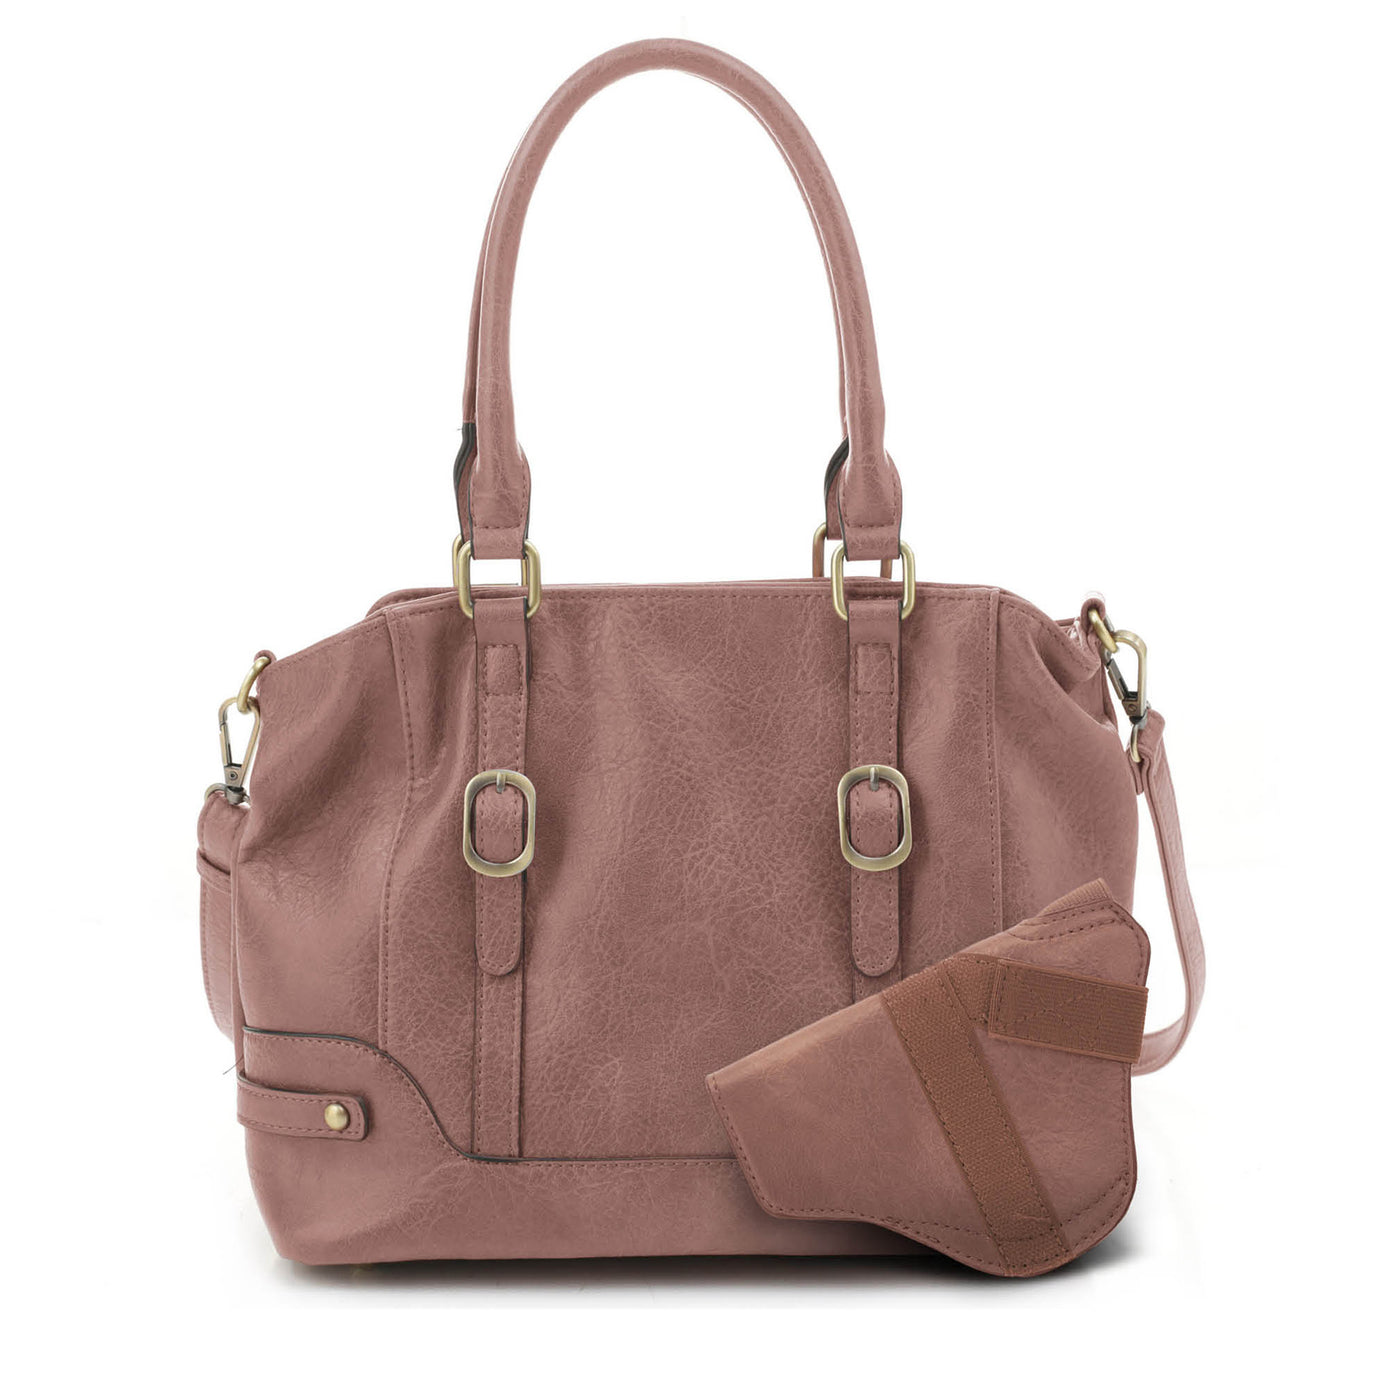 Elena Concealed Carry Lock and Key Satchel